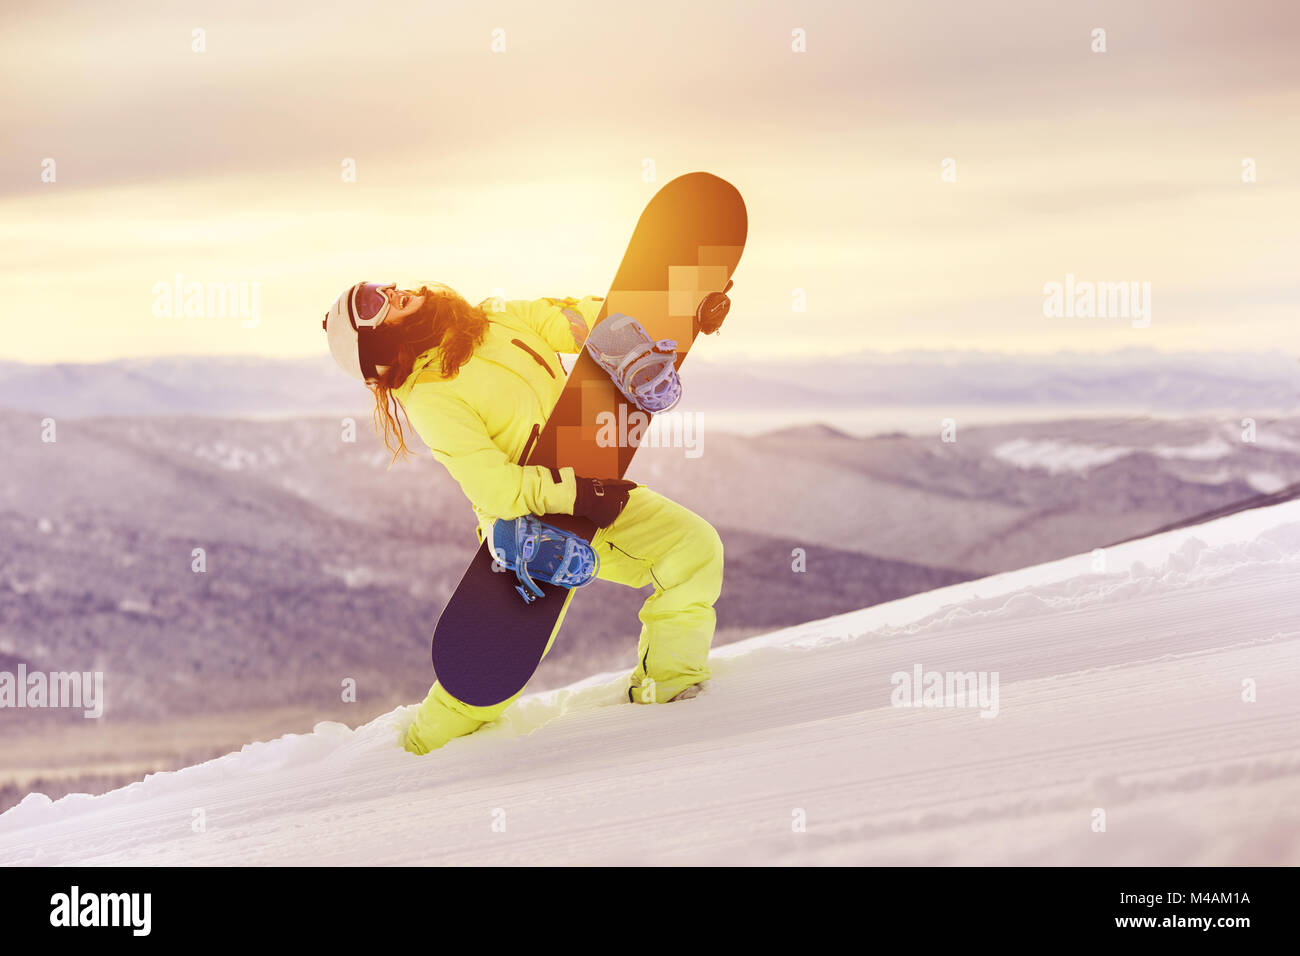 Happy lady snowboarder having fun with snowboard Stock Photo